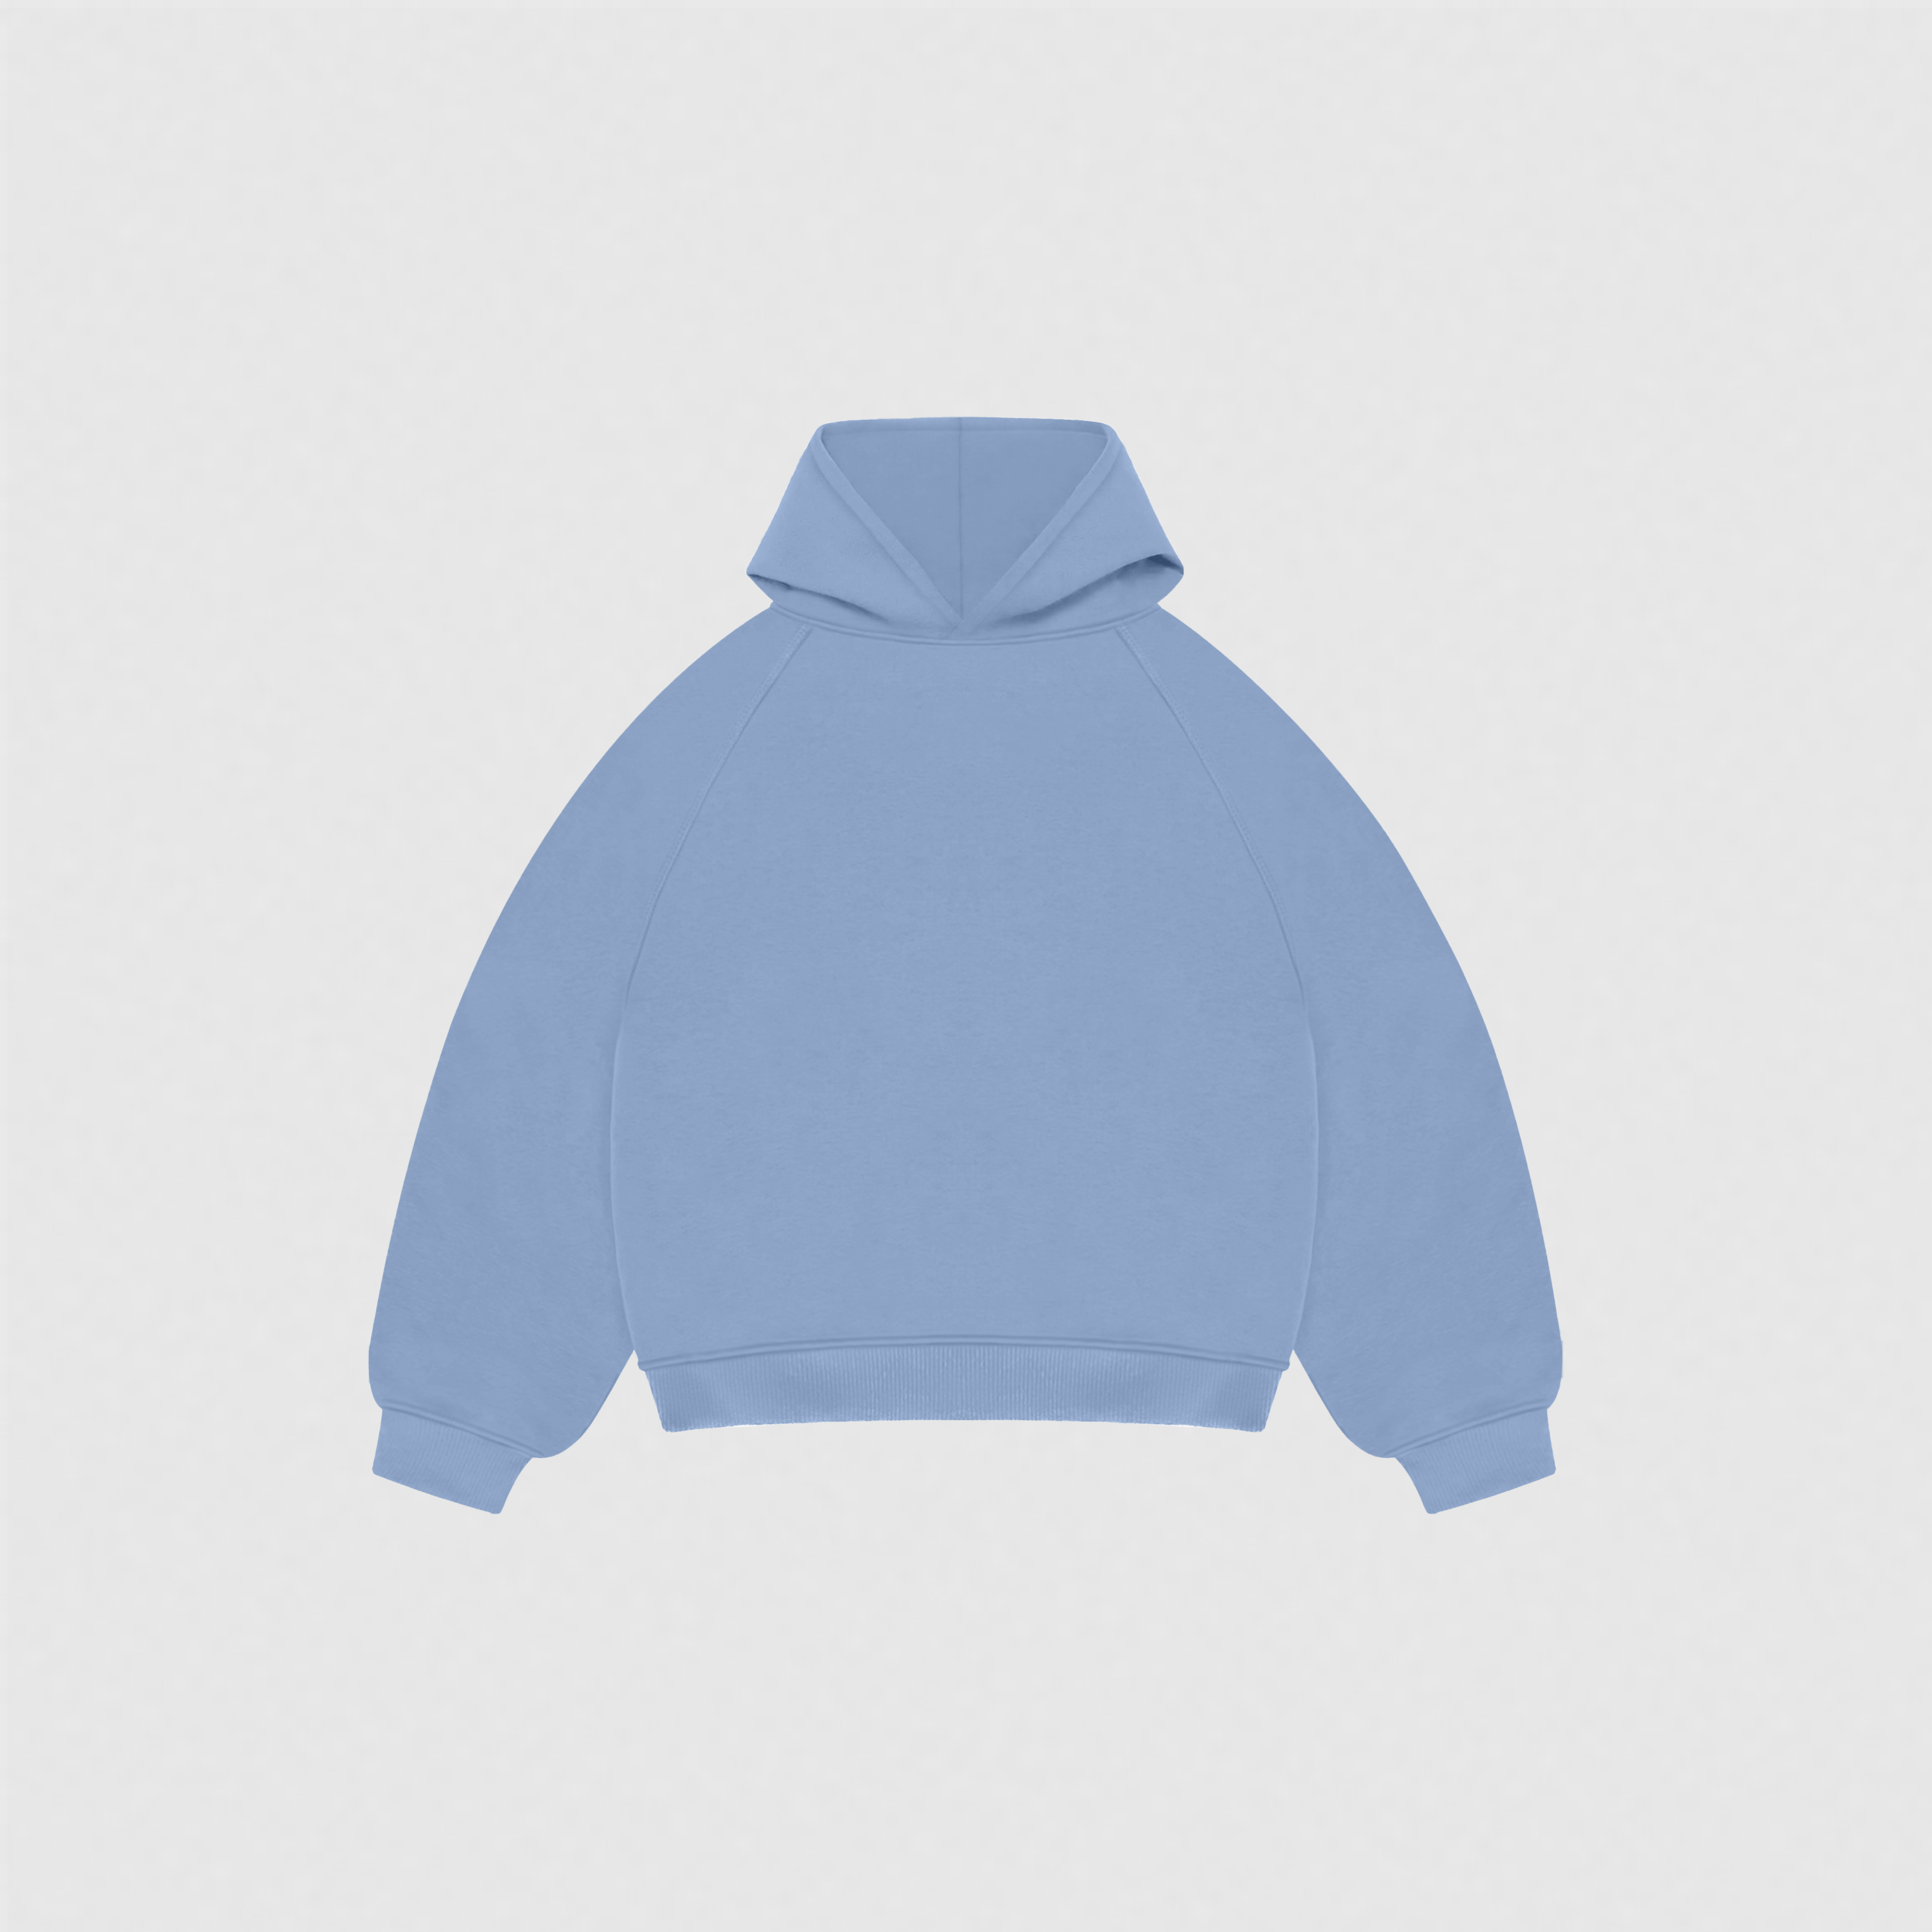 EVERYDAY CLOUDY BLUE HOODIE-Hoodie-Lomalab-2X-SMALL-Light blue-Lomalab